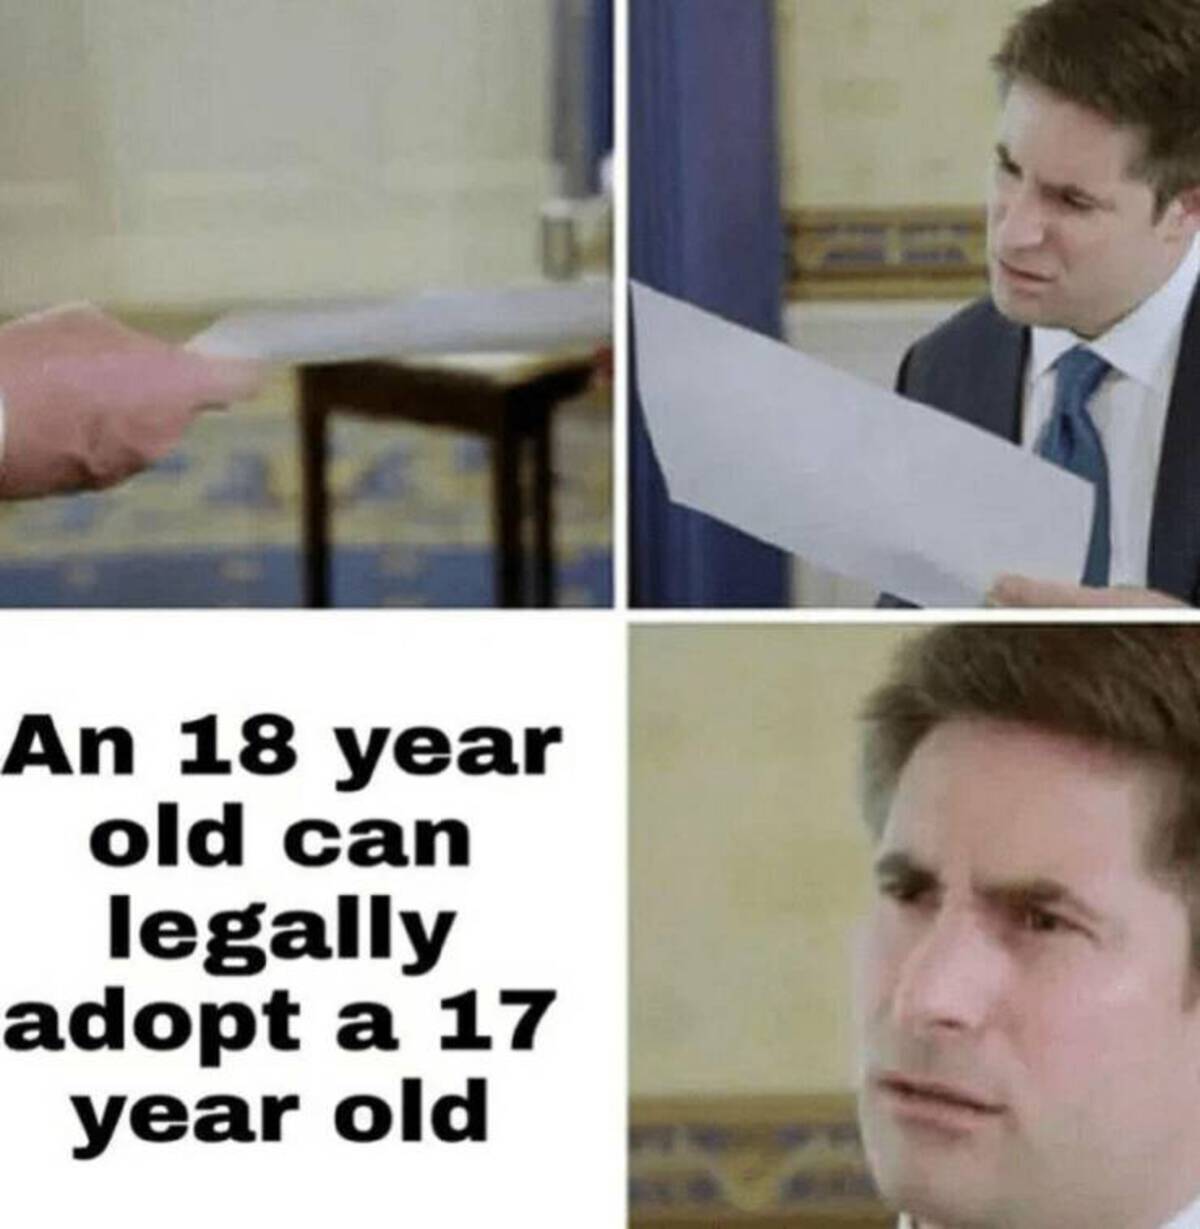 18 year old legally adopt a 17 meme - An 18 year old can legally adopt a 17 year old